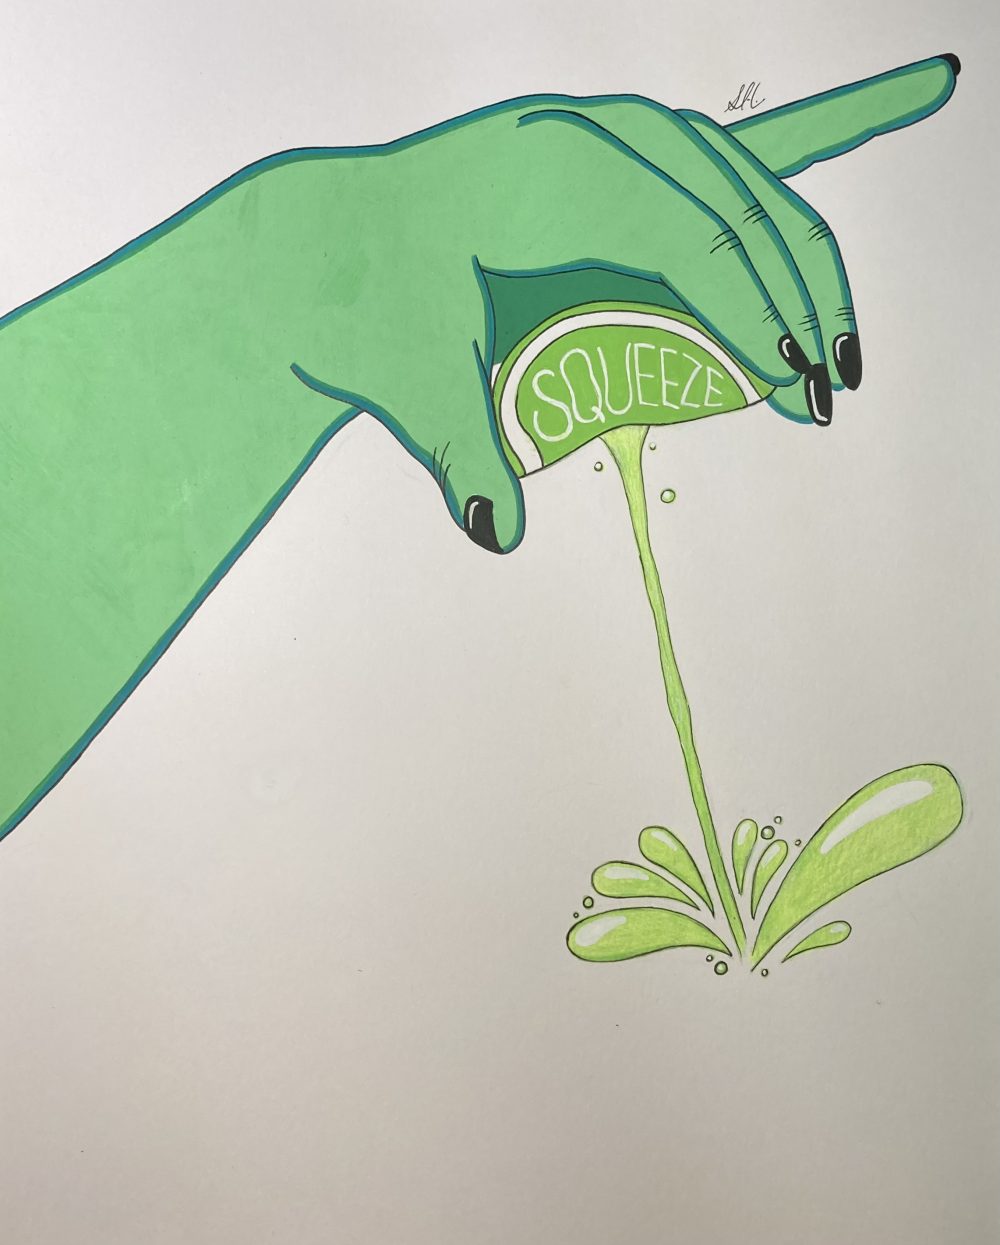 A painting of a green hand squeezing a lime wedge that says “SQUEEZE” in white text and a stream of lime juice coming out.